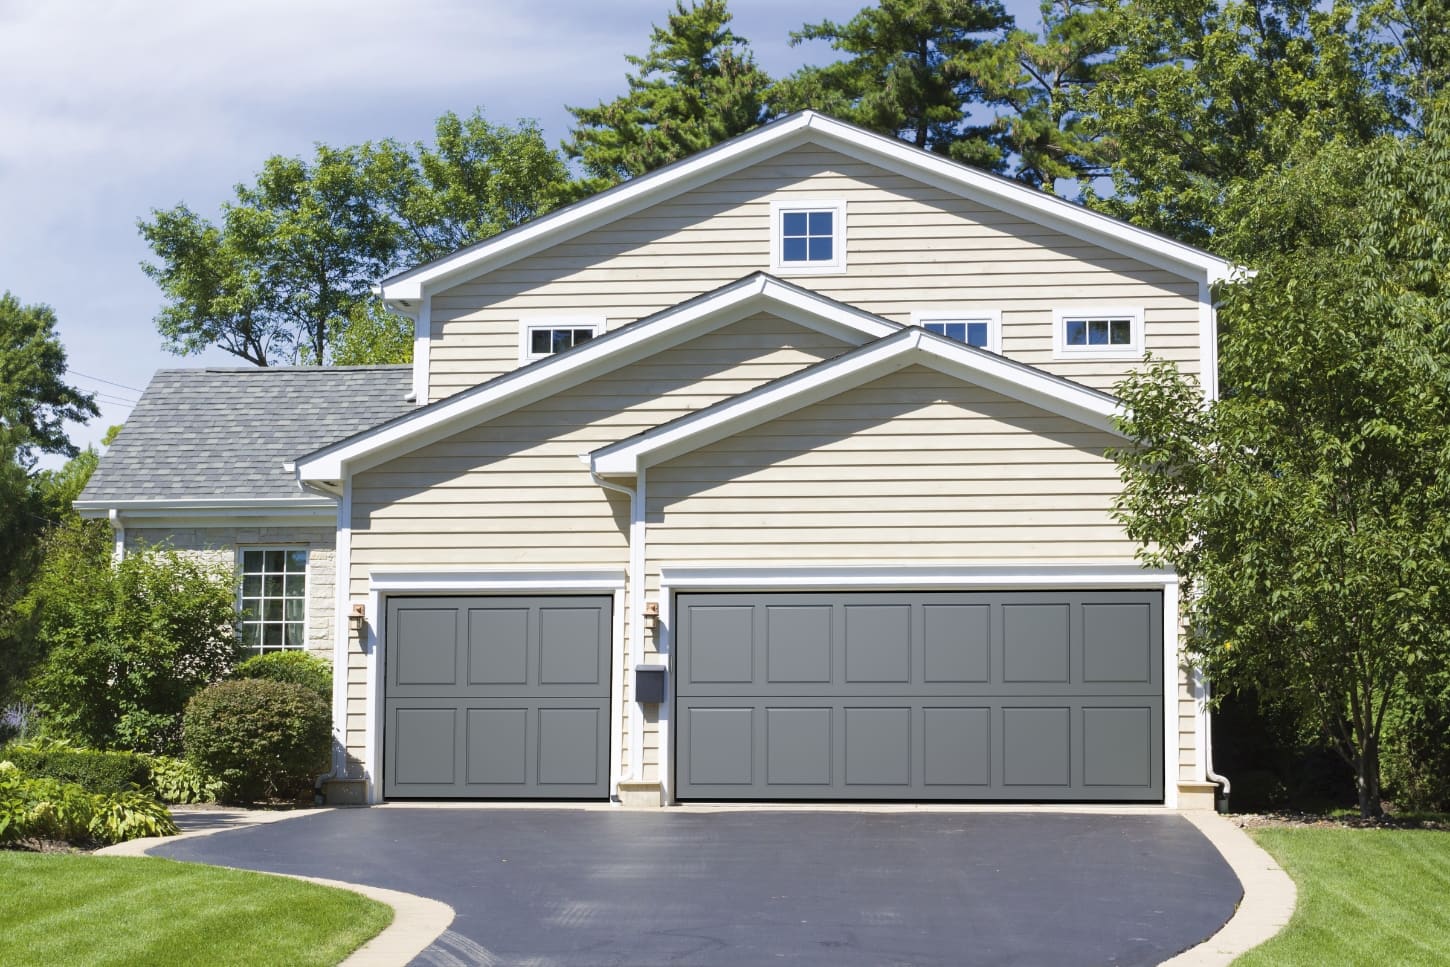 Why You Should Schedule an Annual Garage Door Inspection